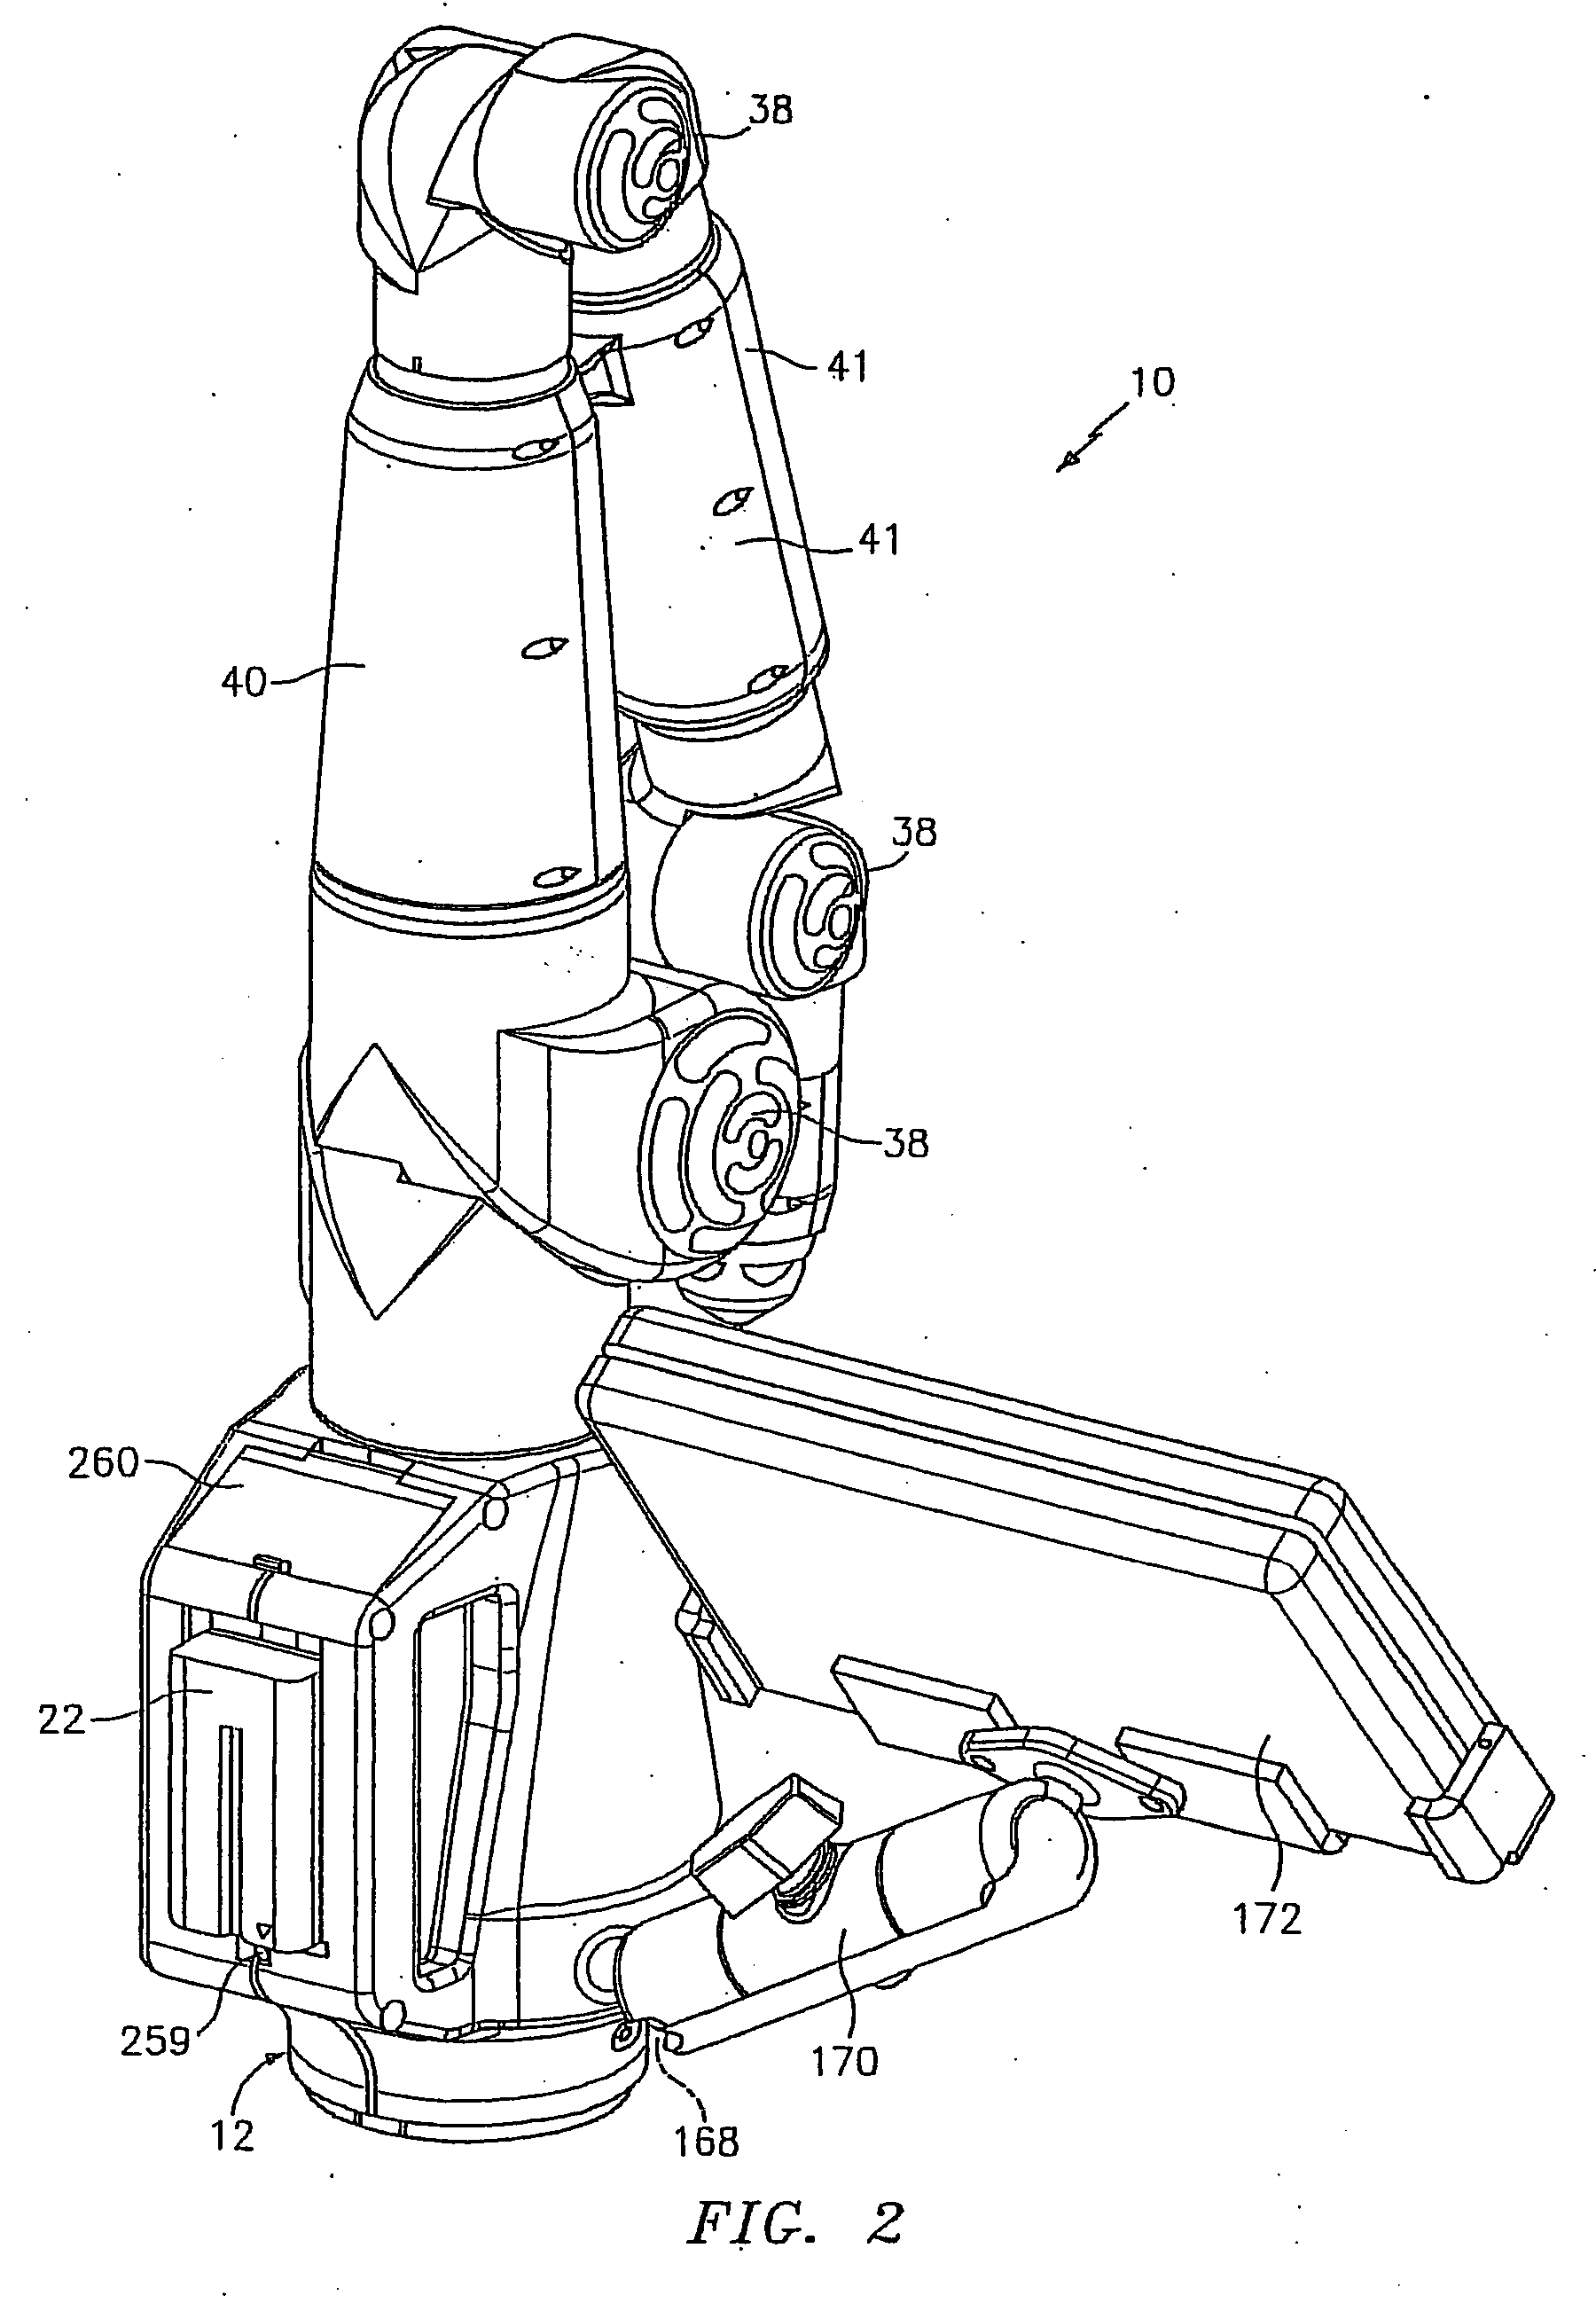 Method for improving measurement accuracy of a portable coordinate measurement machine